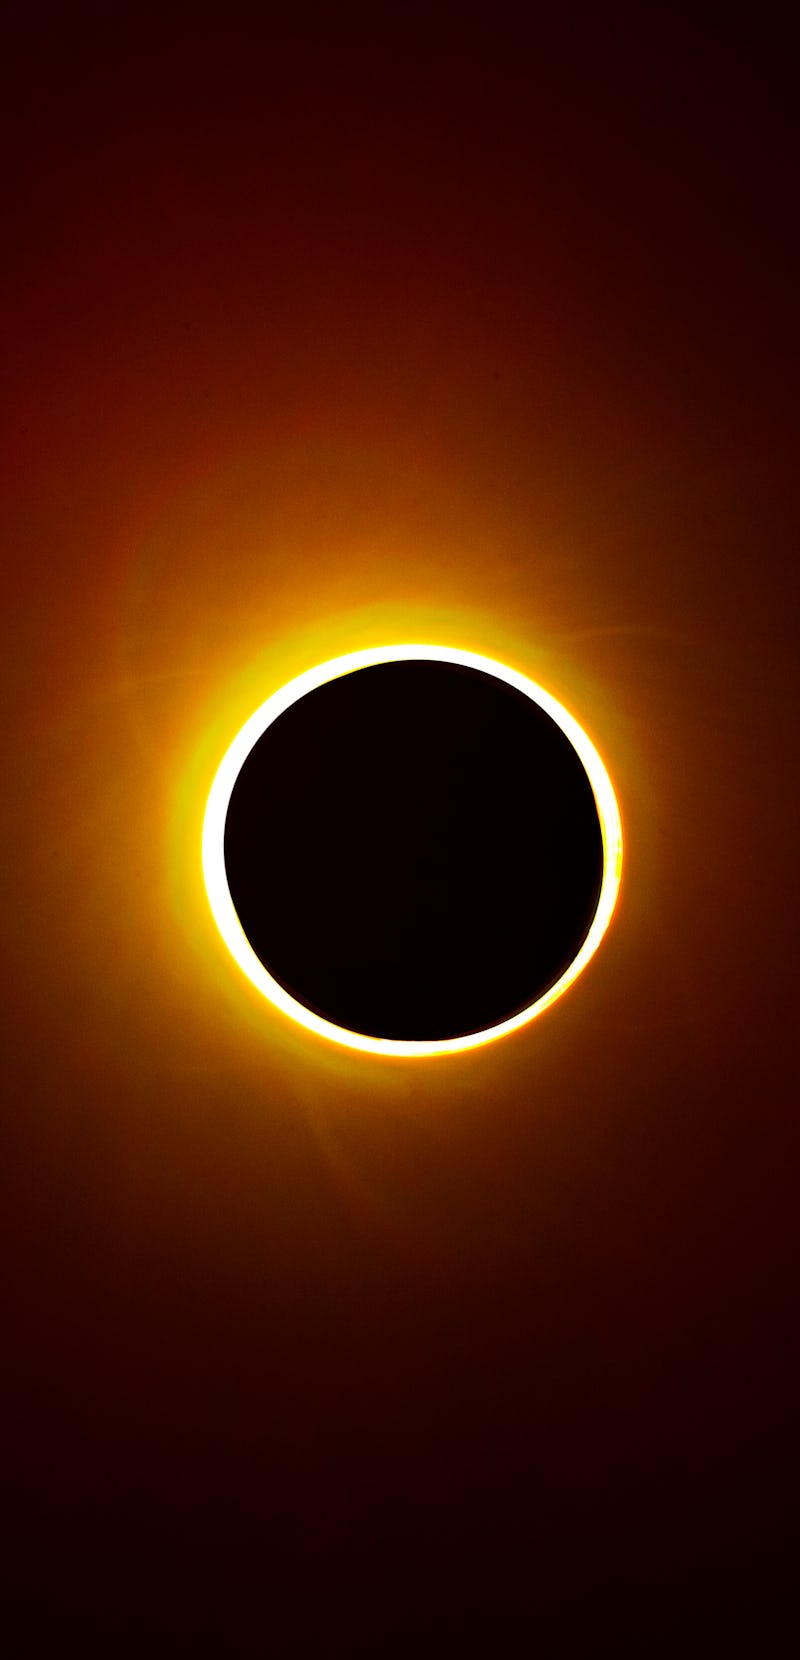 CHIAYI, TAIWAN - 2020/06/21: Annular solar eclipse seen from Chiayi in southern Taiwan on June 21th,...